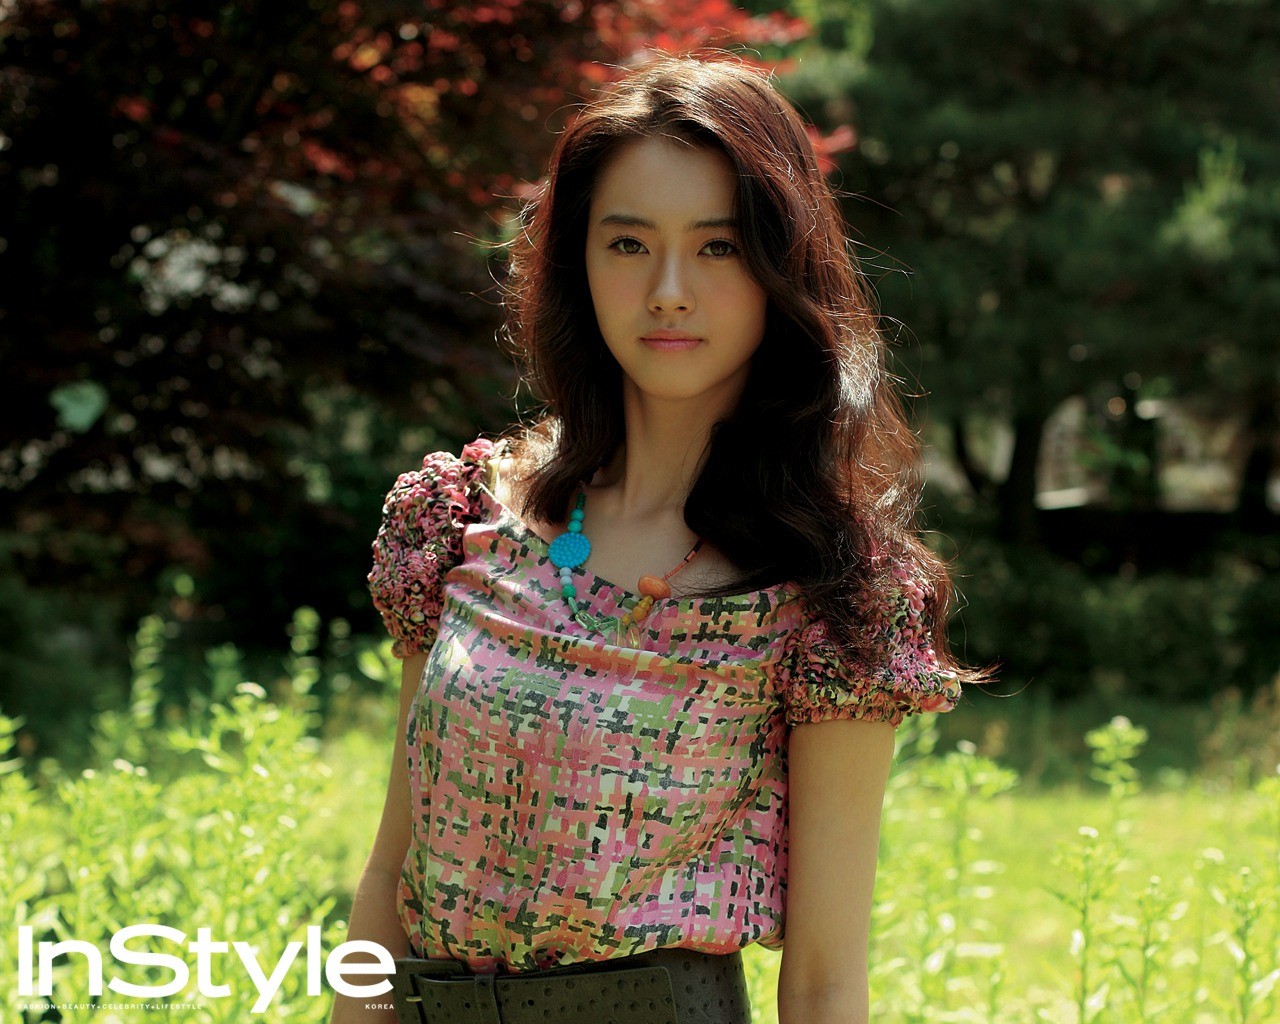 South Korea Instyle Cover Model #30 - 1280x1024